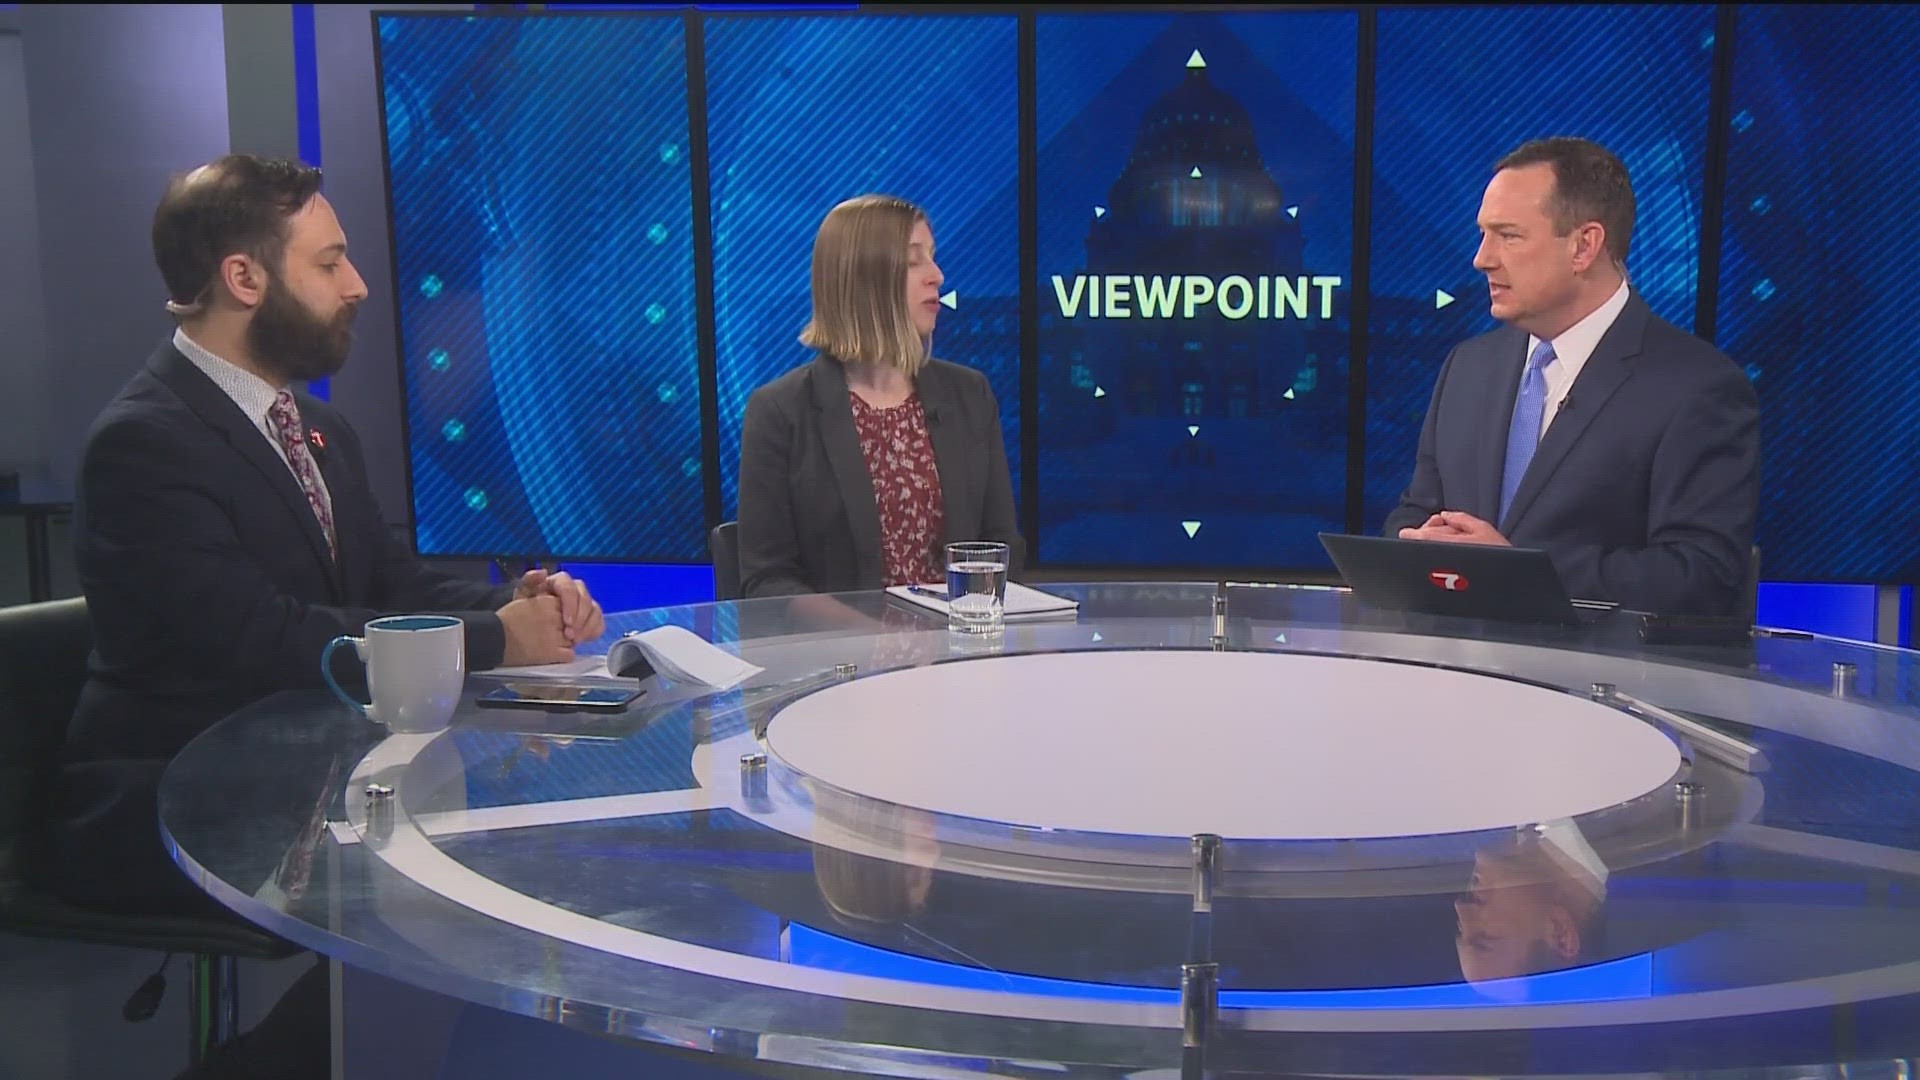 You can watch the full episode of KTVB's Viewpoint on Sunday at 9 a.m.